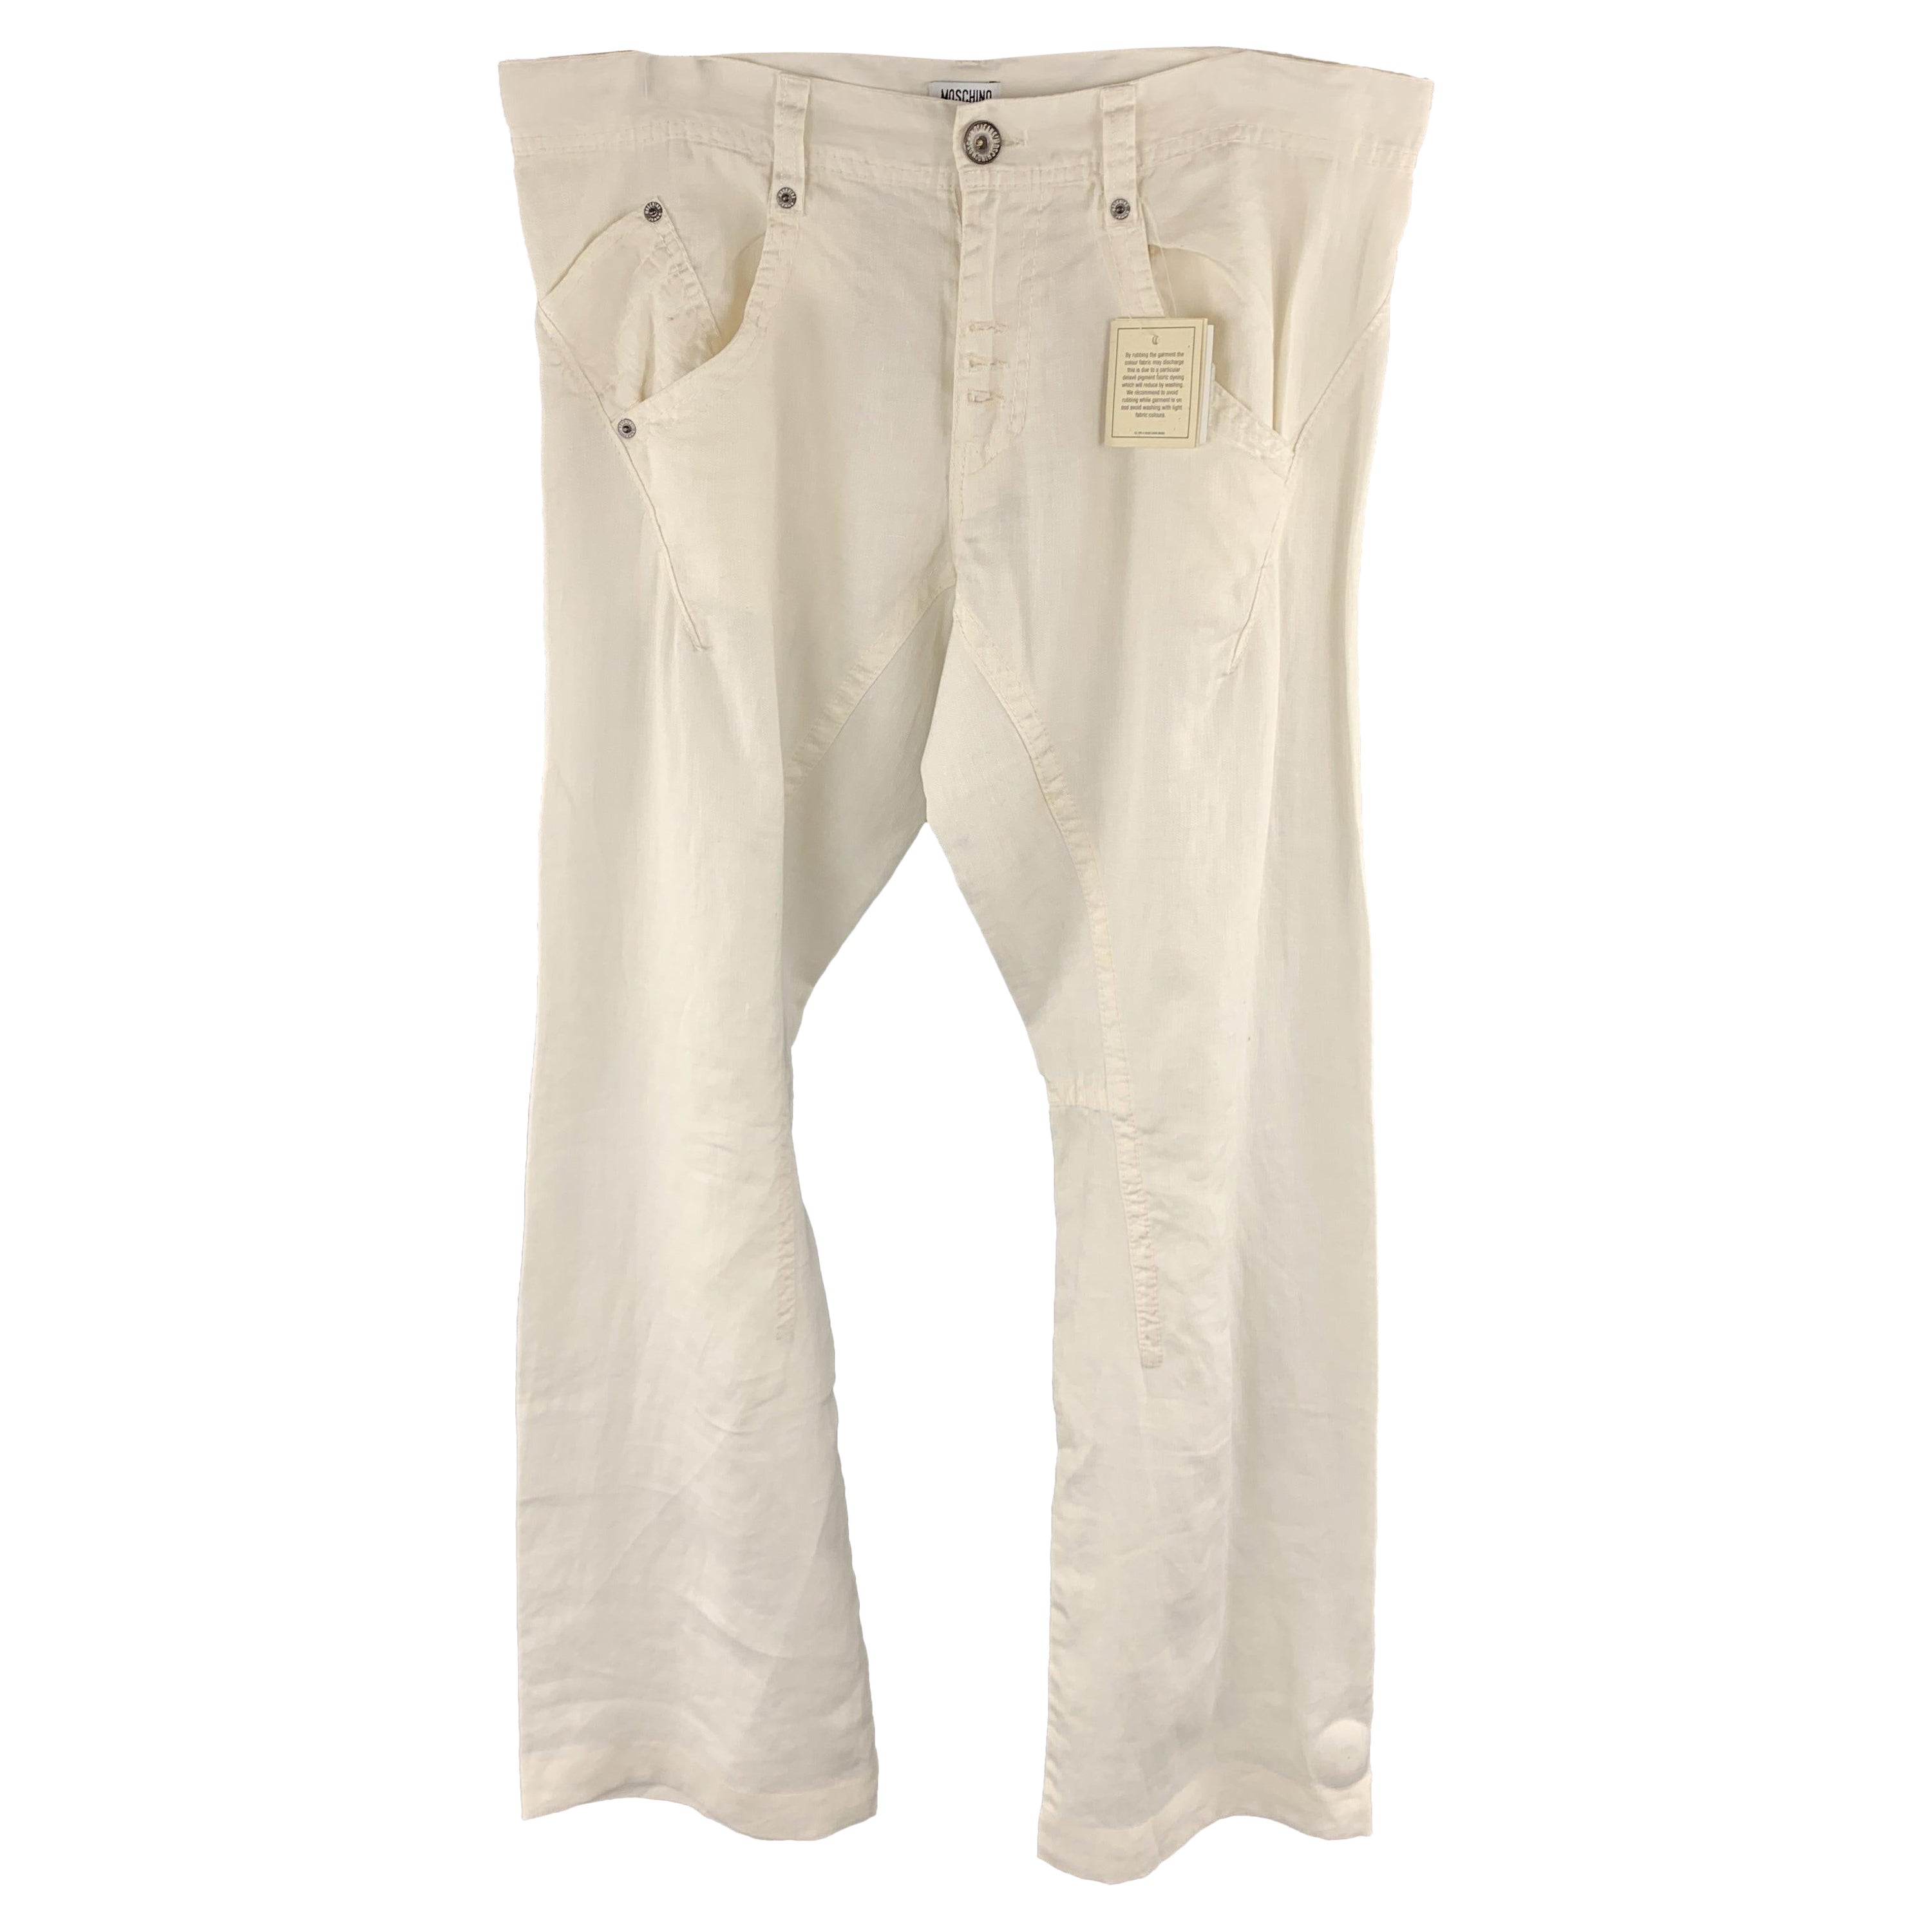 MOSCHINO JEANS Size 32 x 31 White Solid Linen Casual Pants For Sale